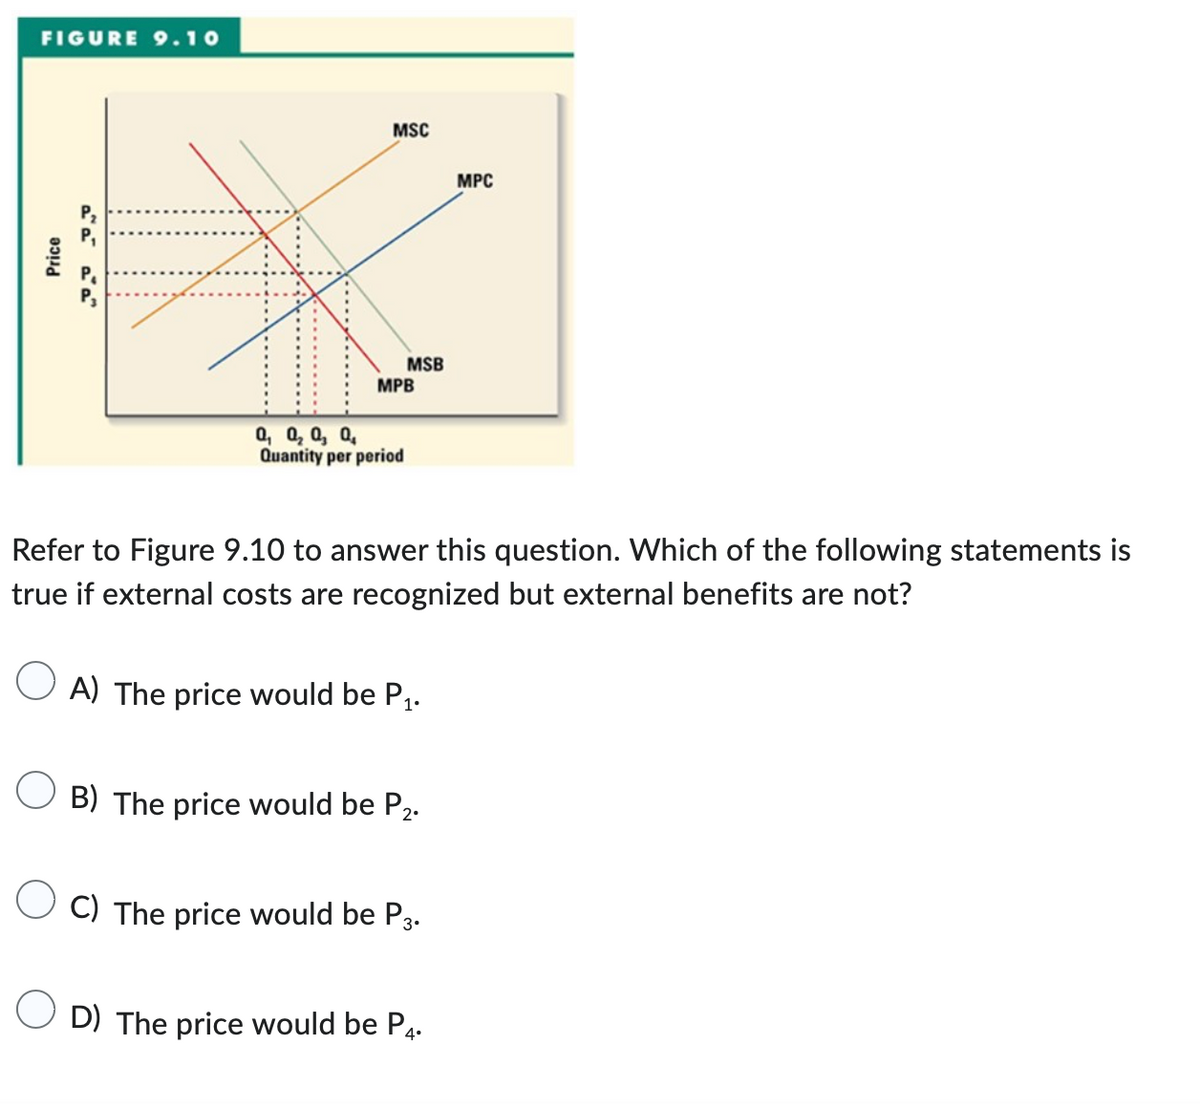 FIGURE 9.10
Price
MSC
MSB
MPB
а, о, о, о,
Quantity per period
Refer to Figure 9.10 to answer this question. Which of the following statements is
true if external costs are recognized but external benefits are not?
OA) The price would be P₁.
B) The price would be P₂.
MPC
OC) The price would be P3.
O D) The price would be P4.